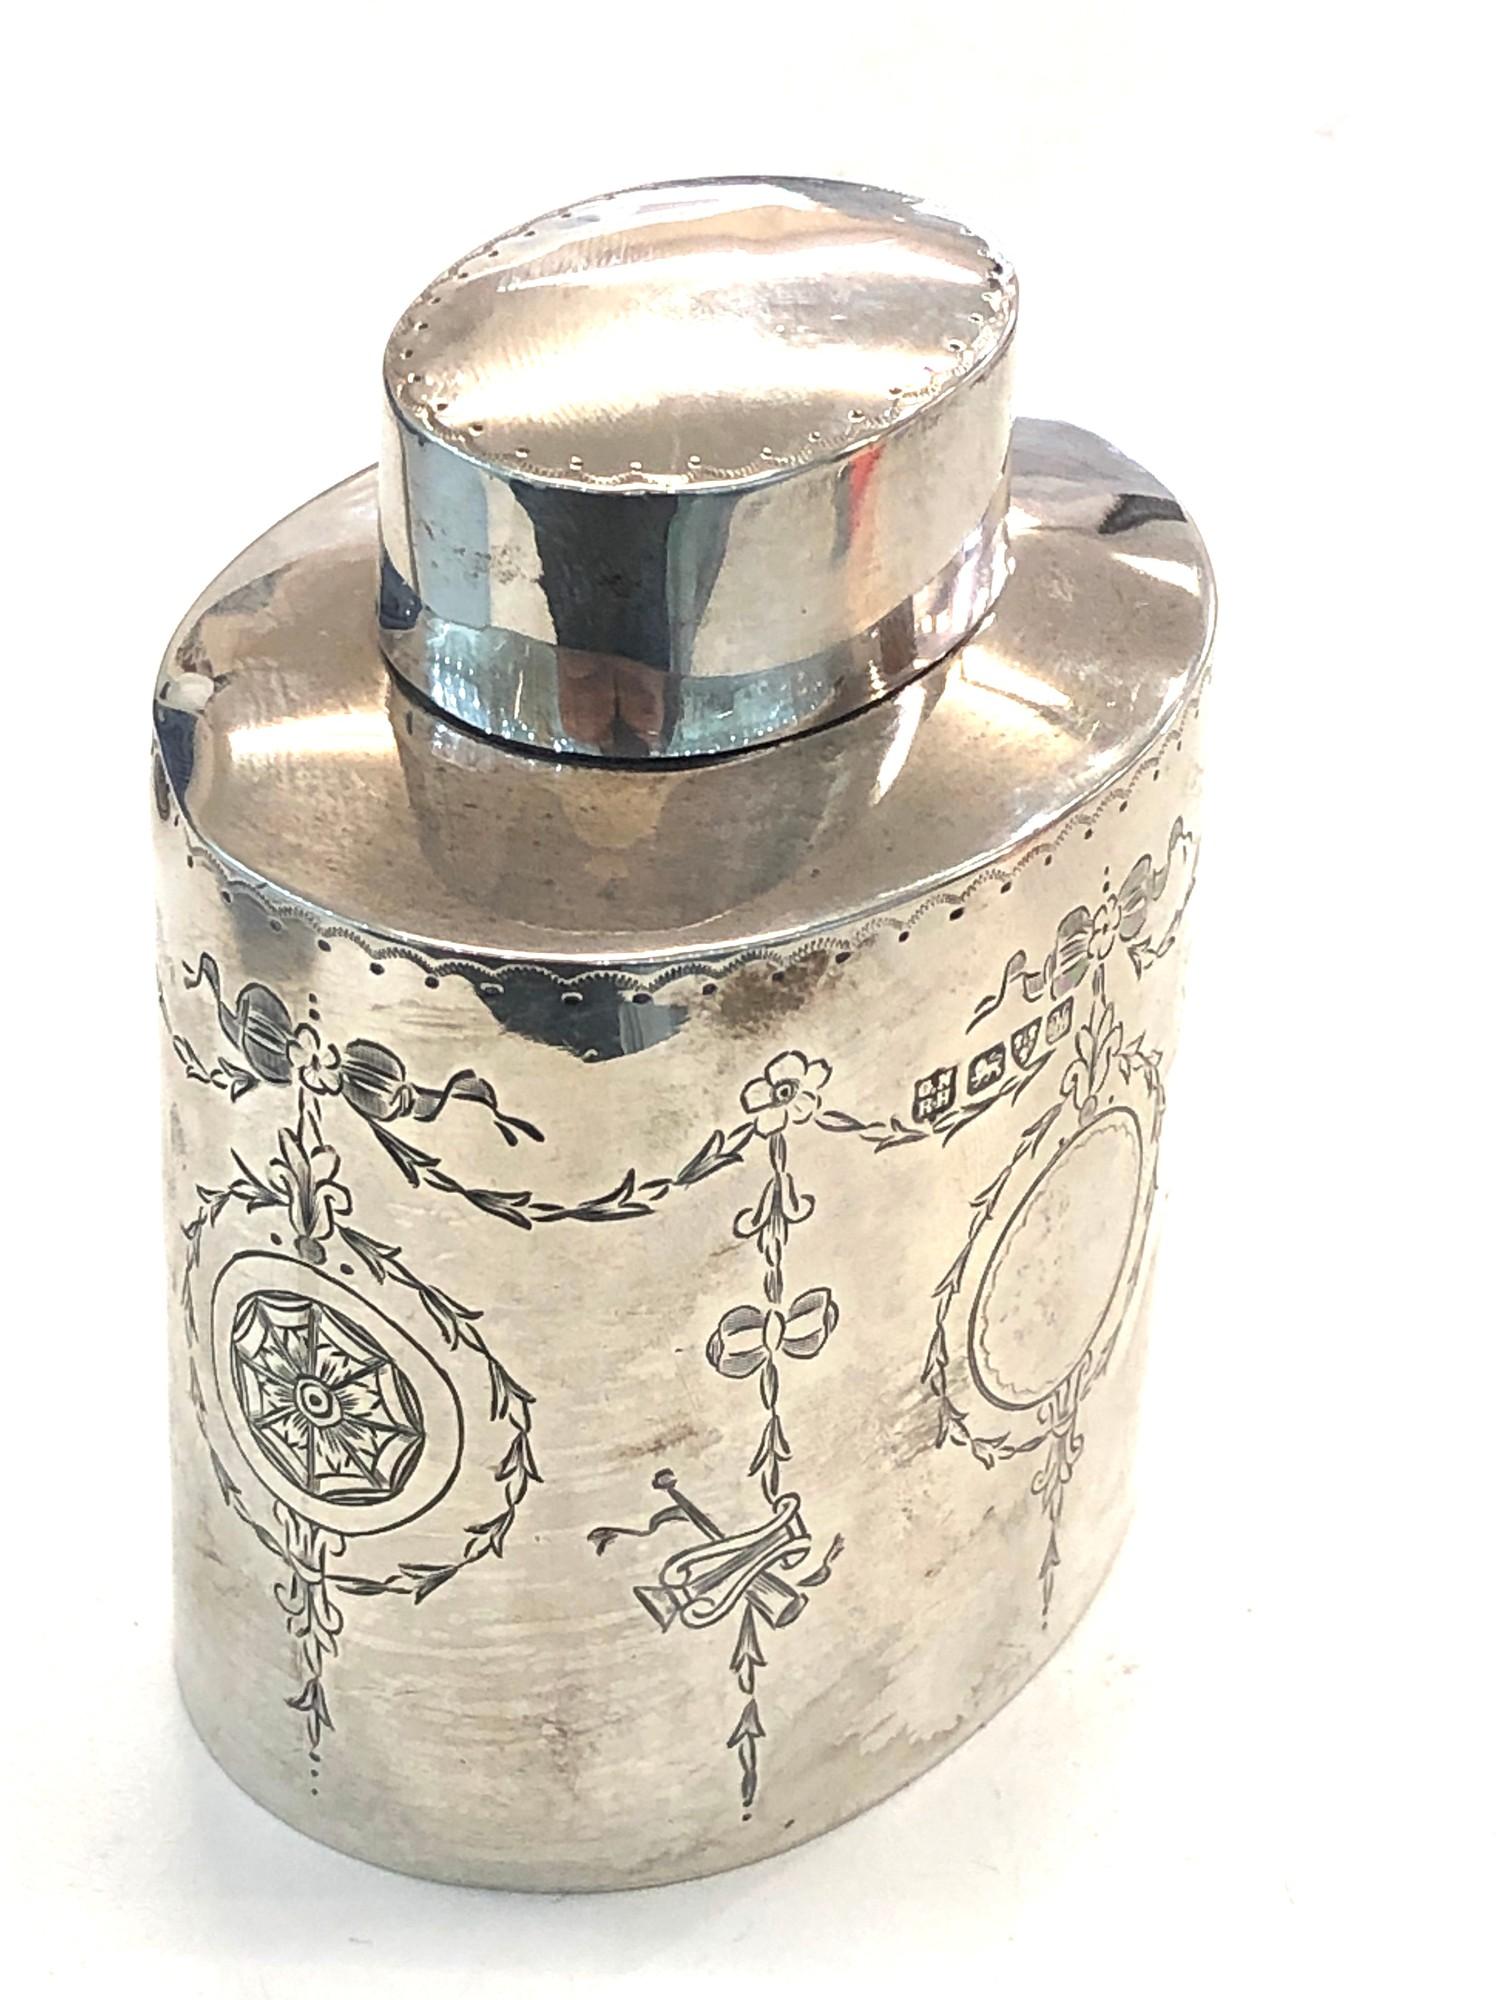 Antique silver tea caddy Chester silver hallmarks weight 124g - Image 3 of 3